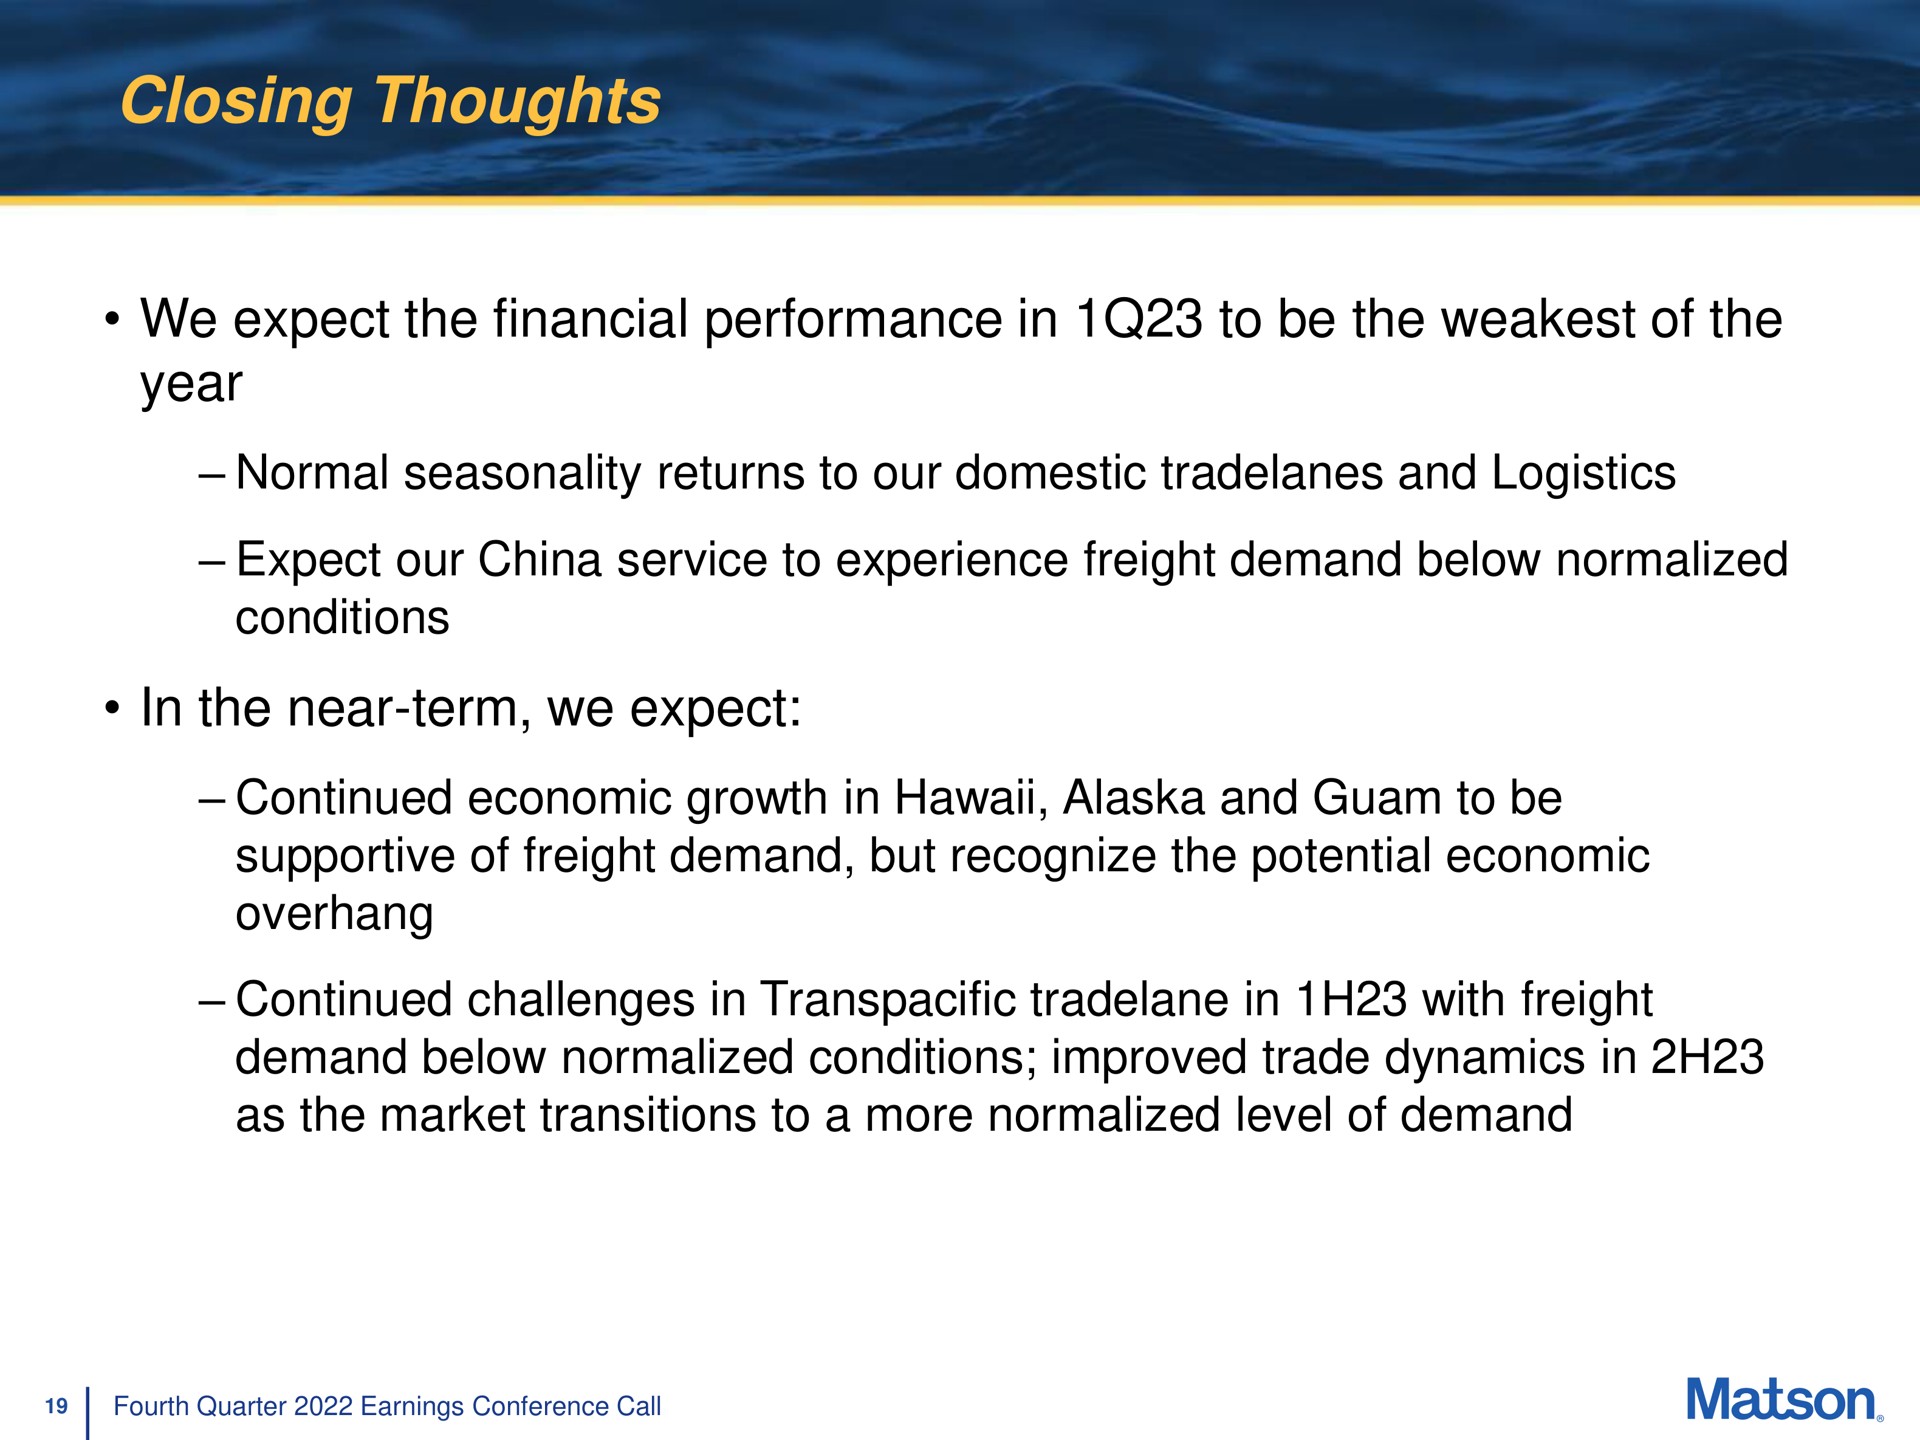 closing thoughts we expect the financial performance in to be the of the year in the near term we expect normal seasonality returns our domestic and logistics continued economic growth and supportive freight demand but recognize potential economic continued challenges transpacific with freight demand below normalized conditions improved trade dynamics as market transitions a more normalized level demand | Matson